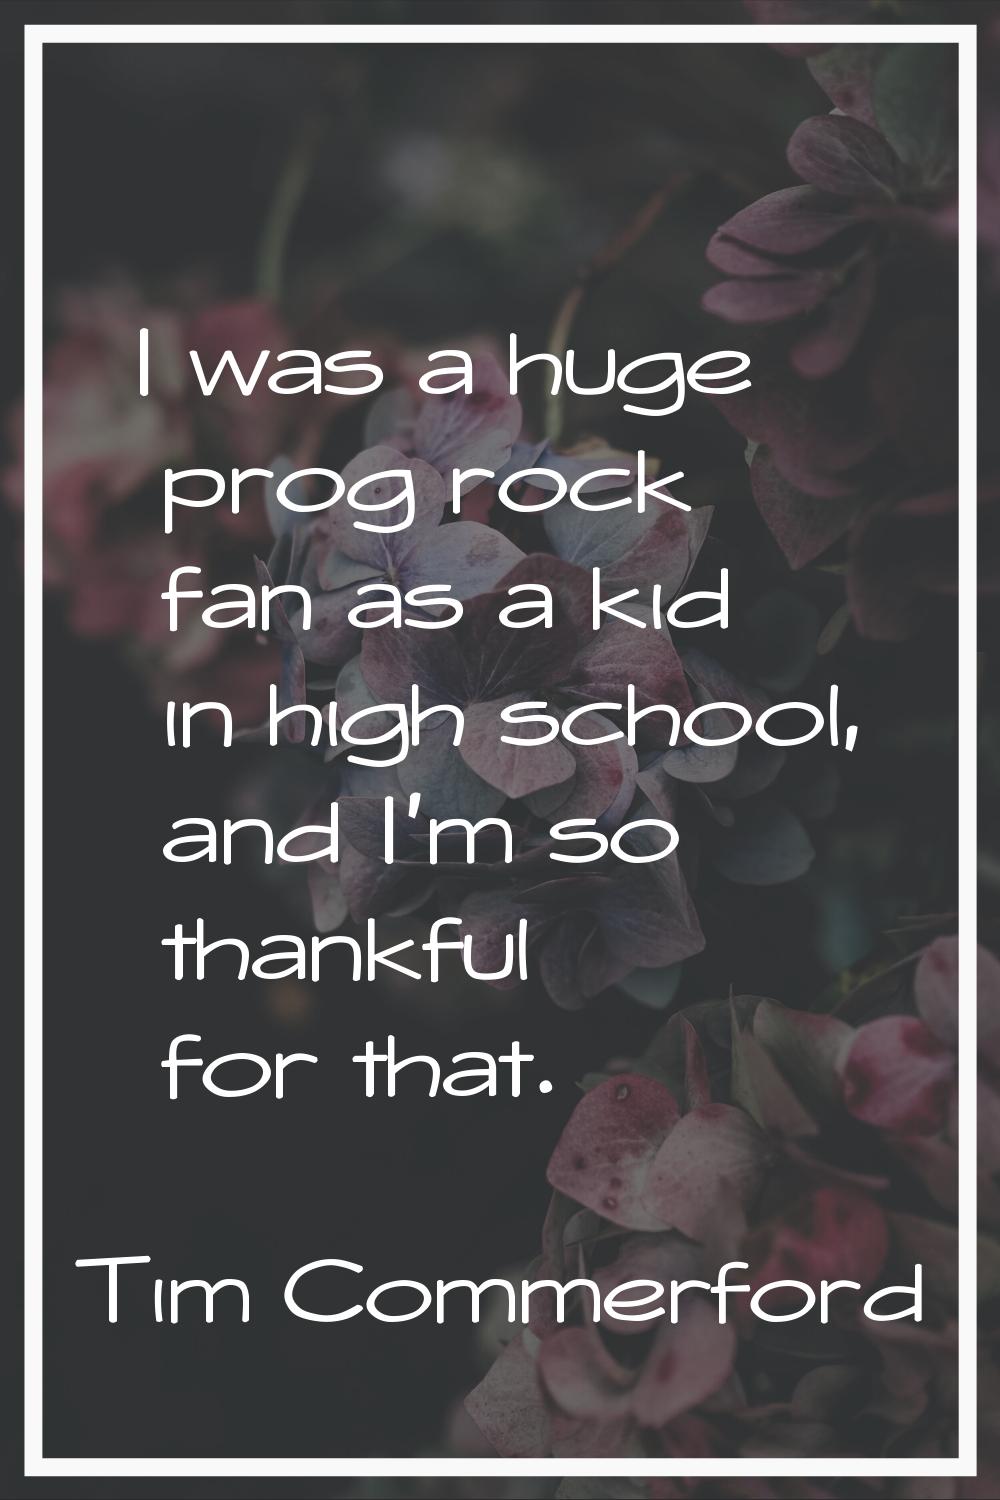 I was a huge prog rock fan as a kid in high school, and I'm so thankful for that.